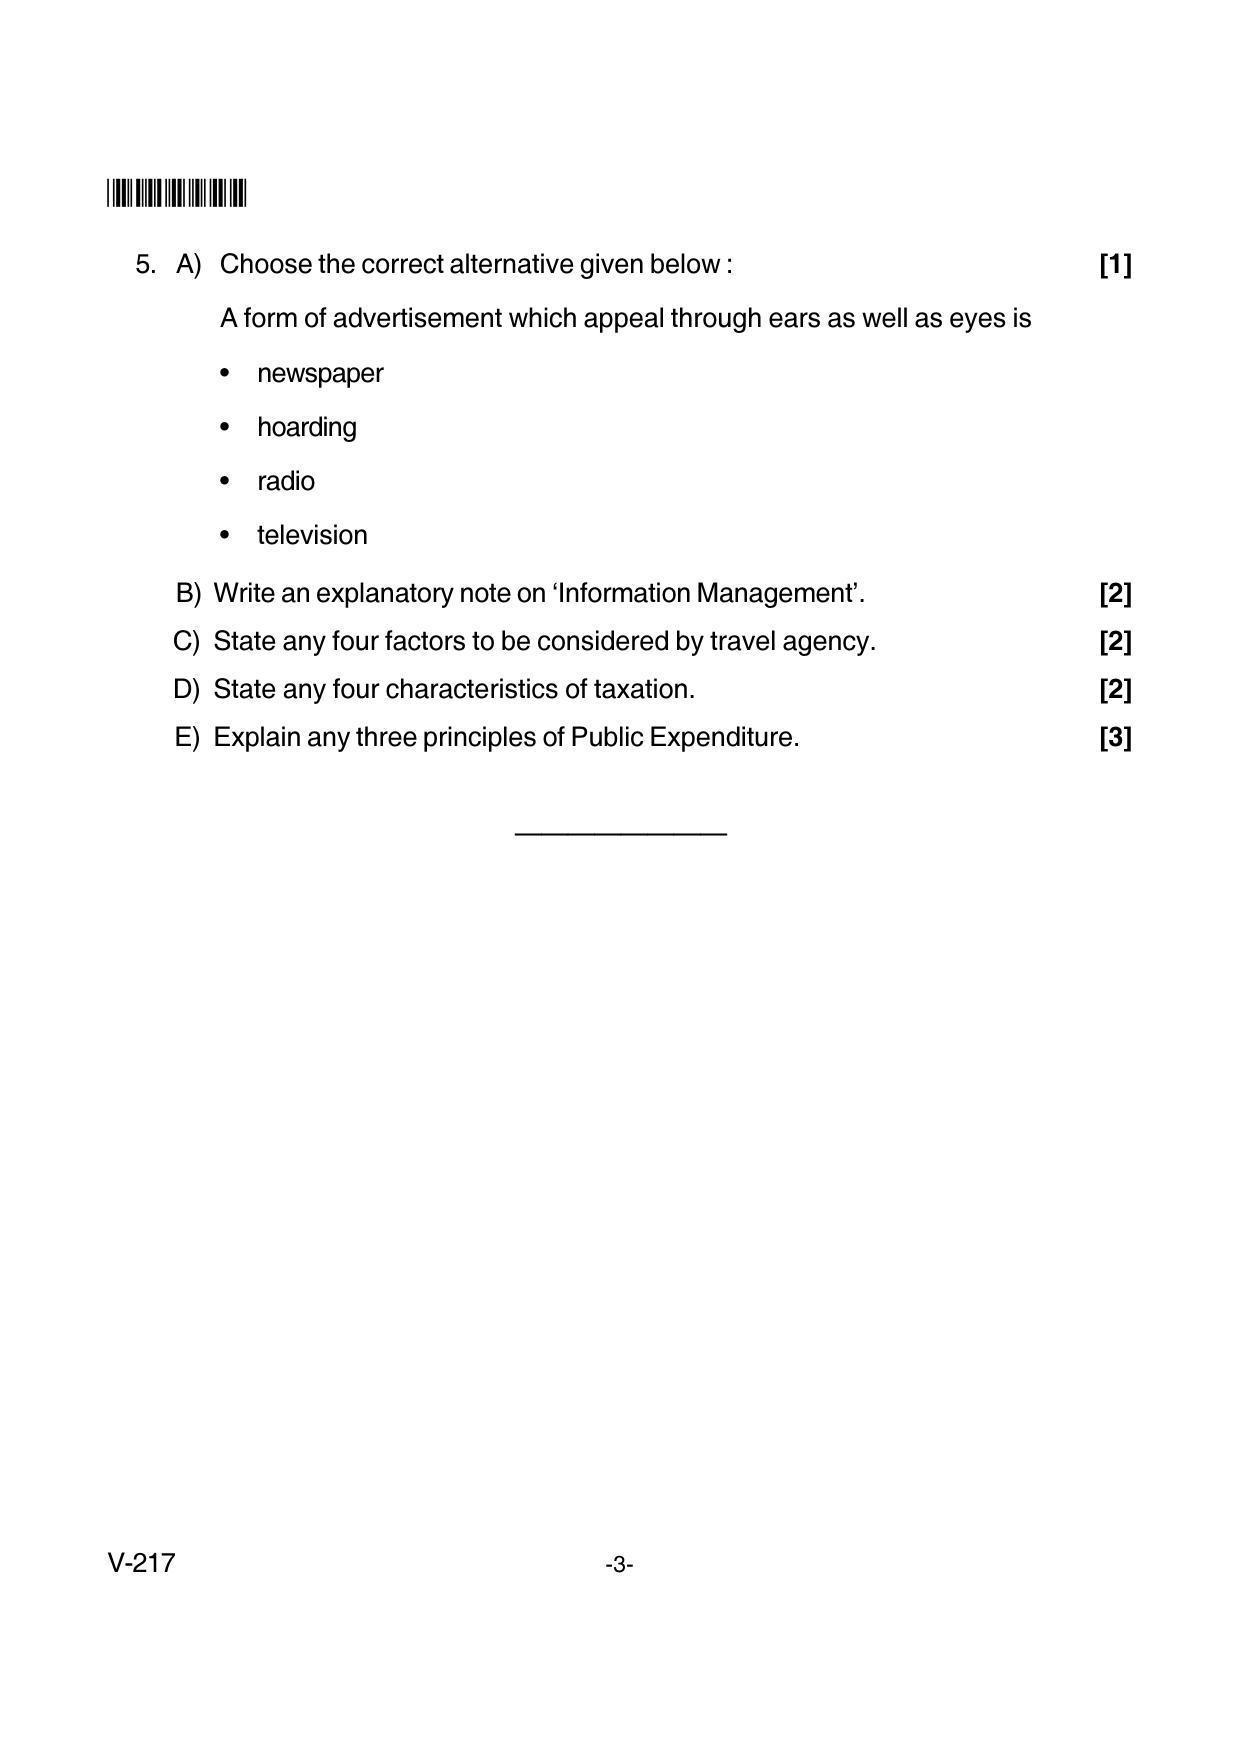 Goa Board Class 12 Business Administration  Voc 217 New Pattern (March 2018) Question Paper - Page 3